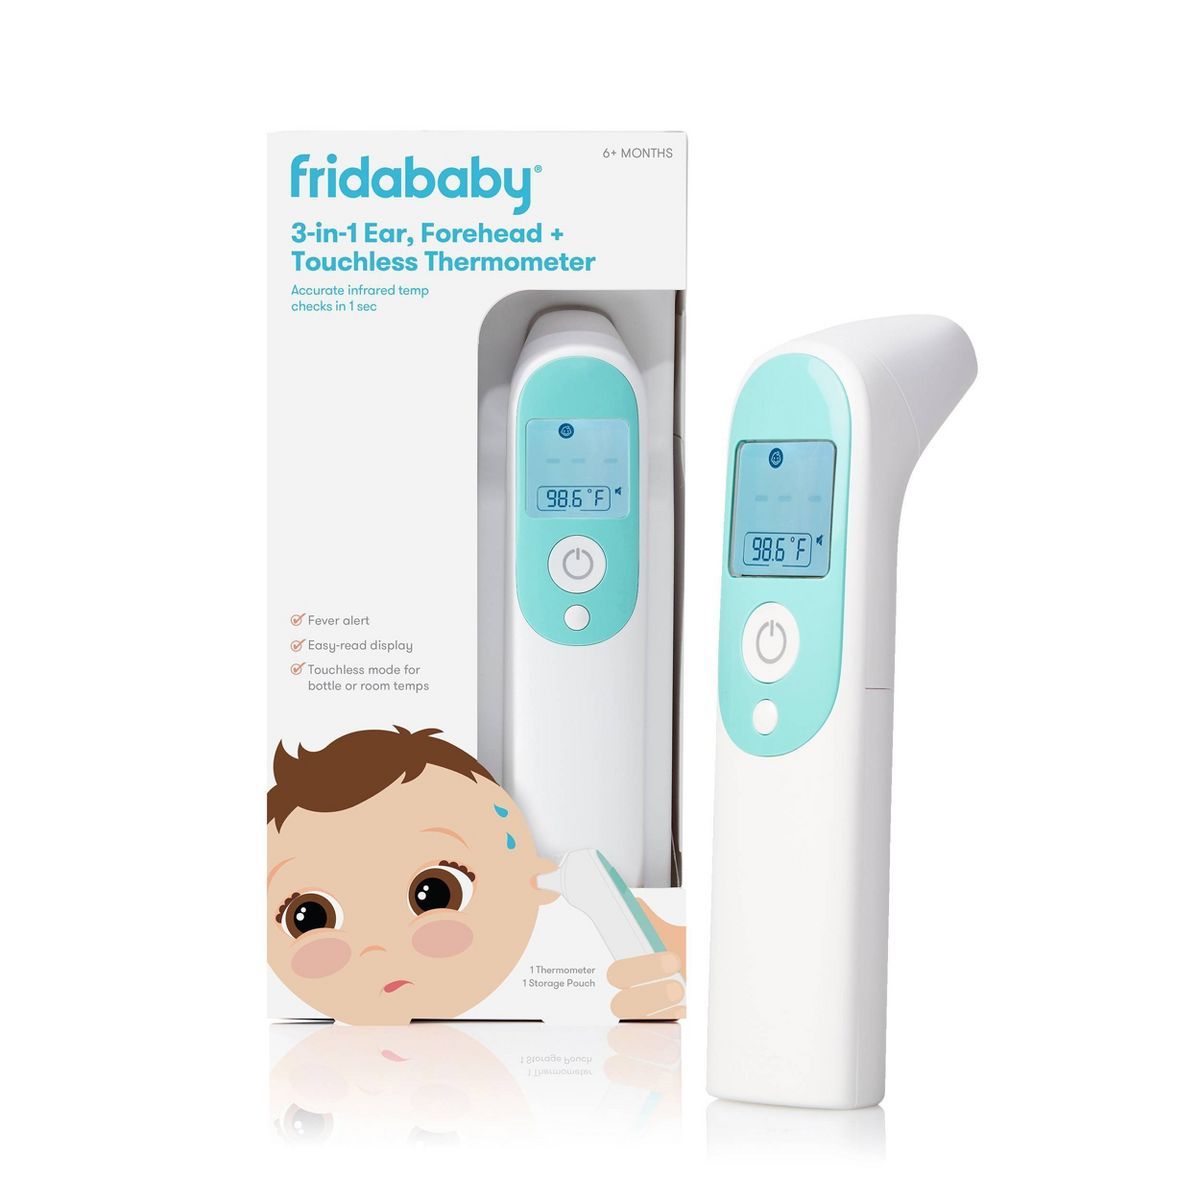 Frida Baby 3-in-1 Ear and Forehead Infrared Thermometer | Target